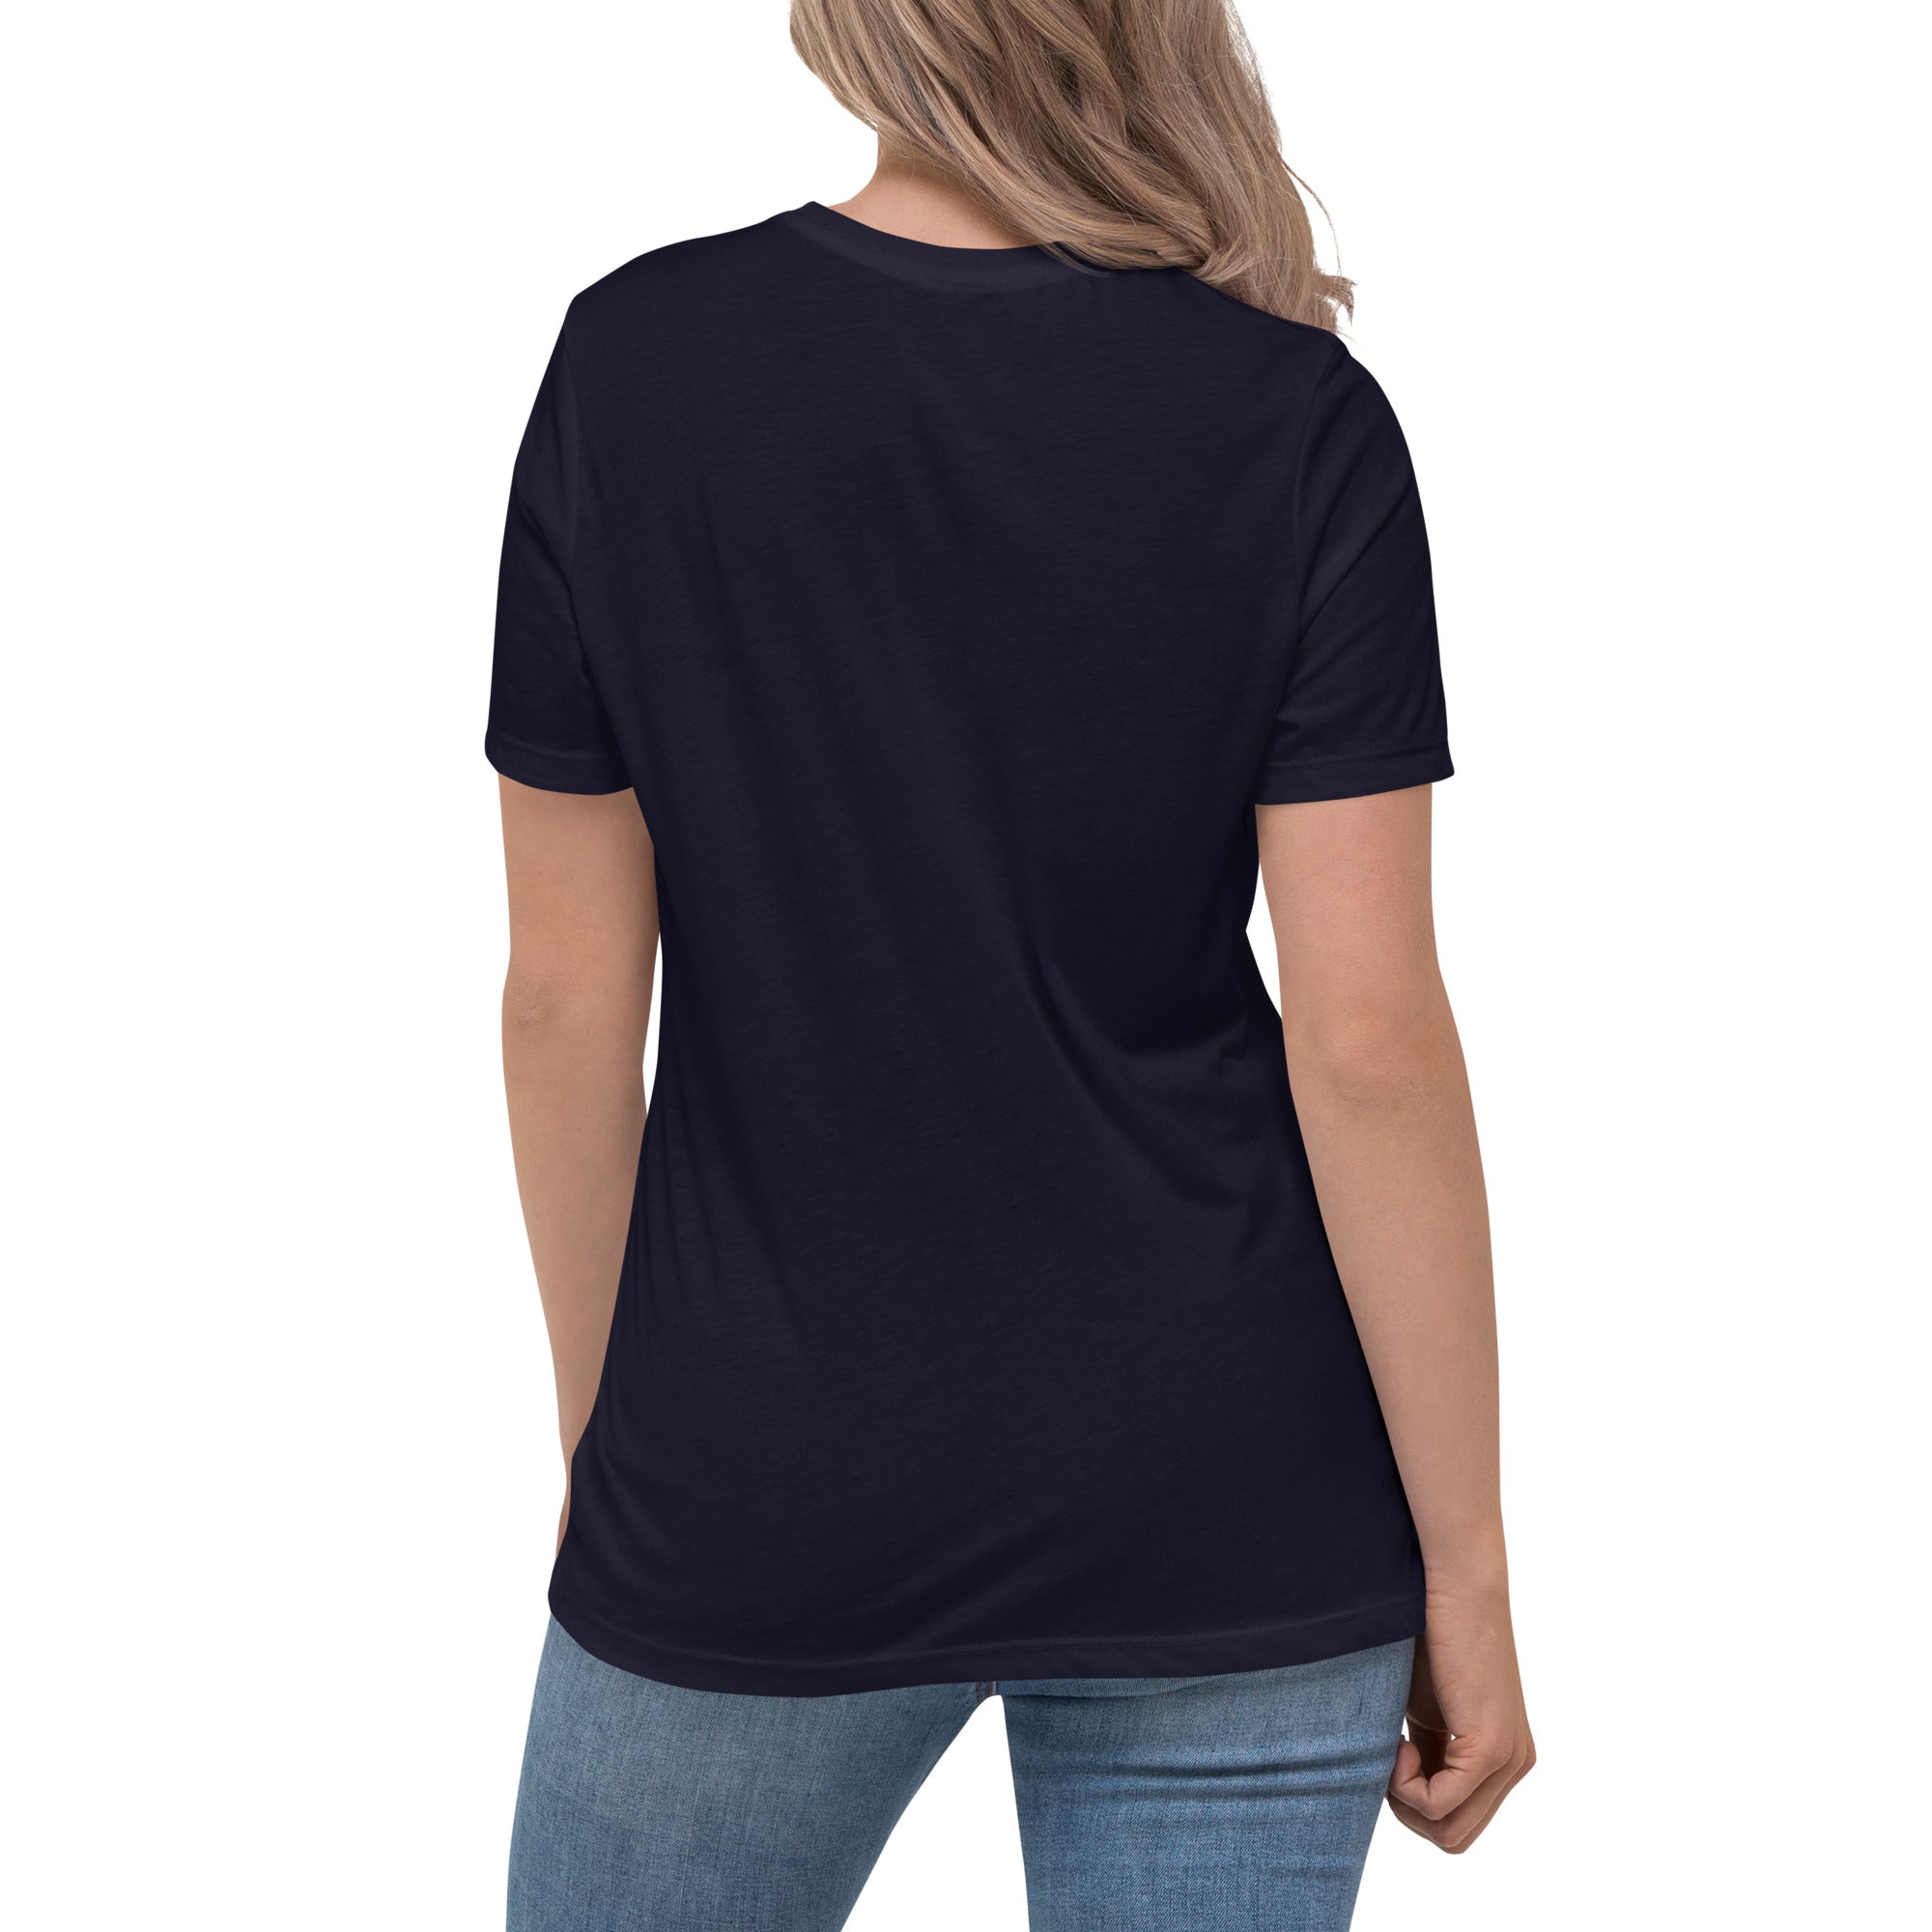 Preserve American Freedom Women's Relaxed Graphic T-Shirt